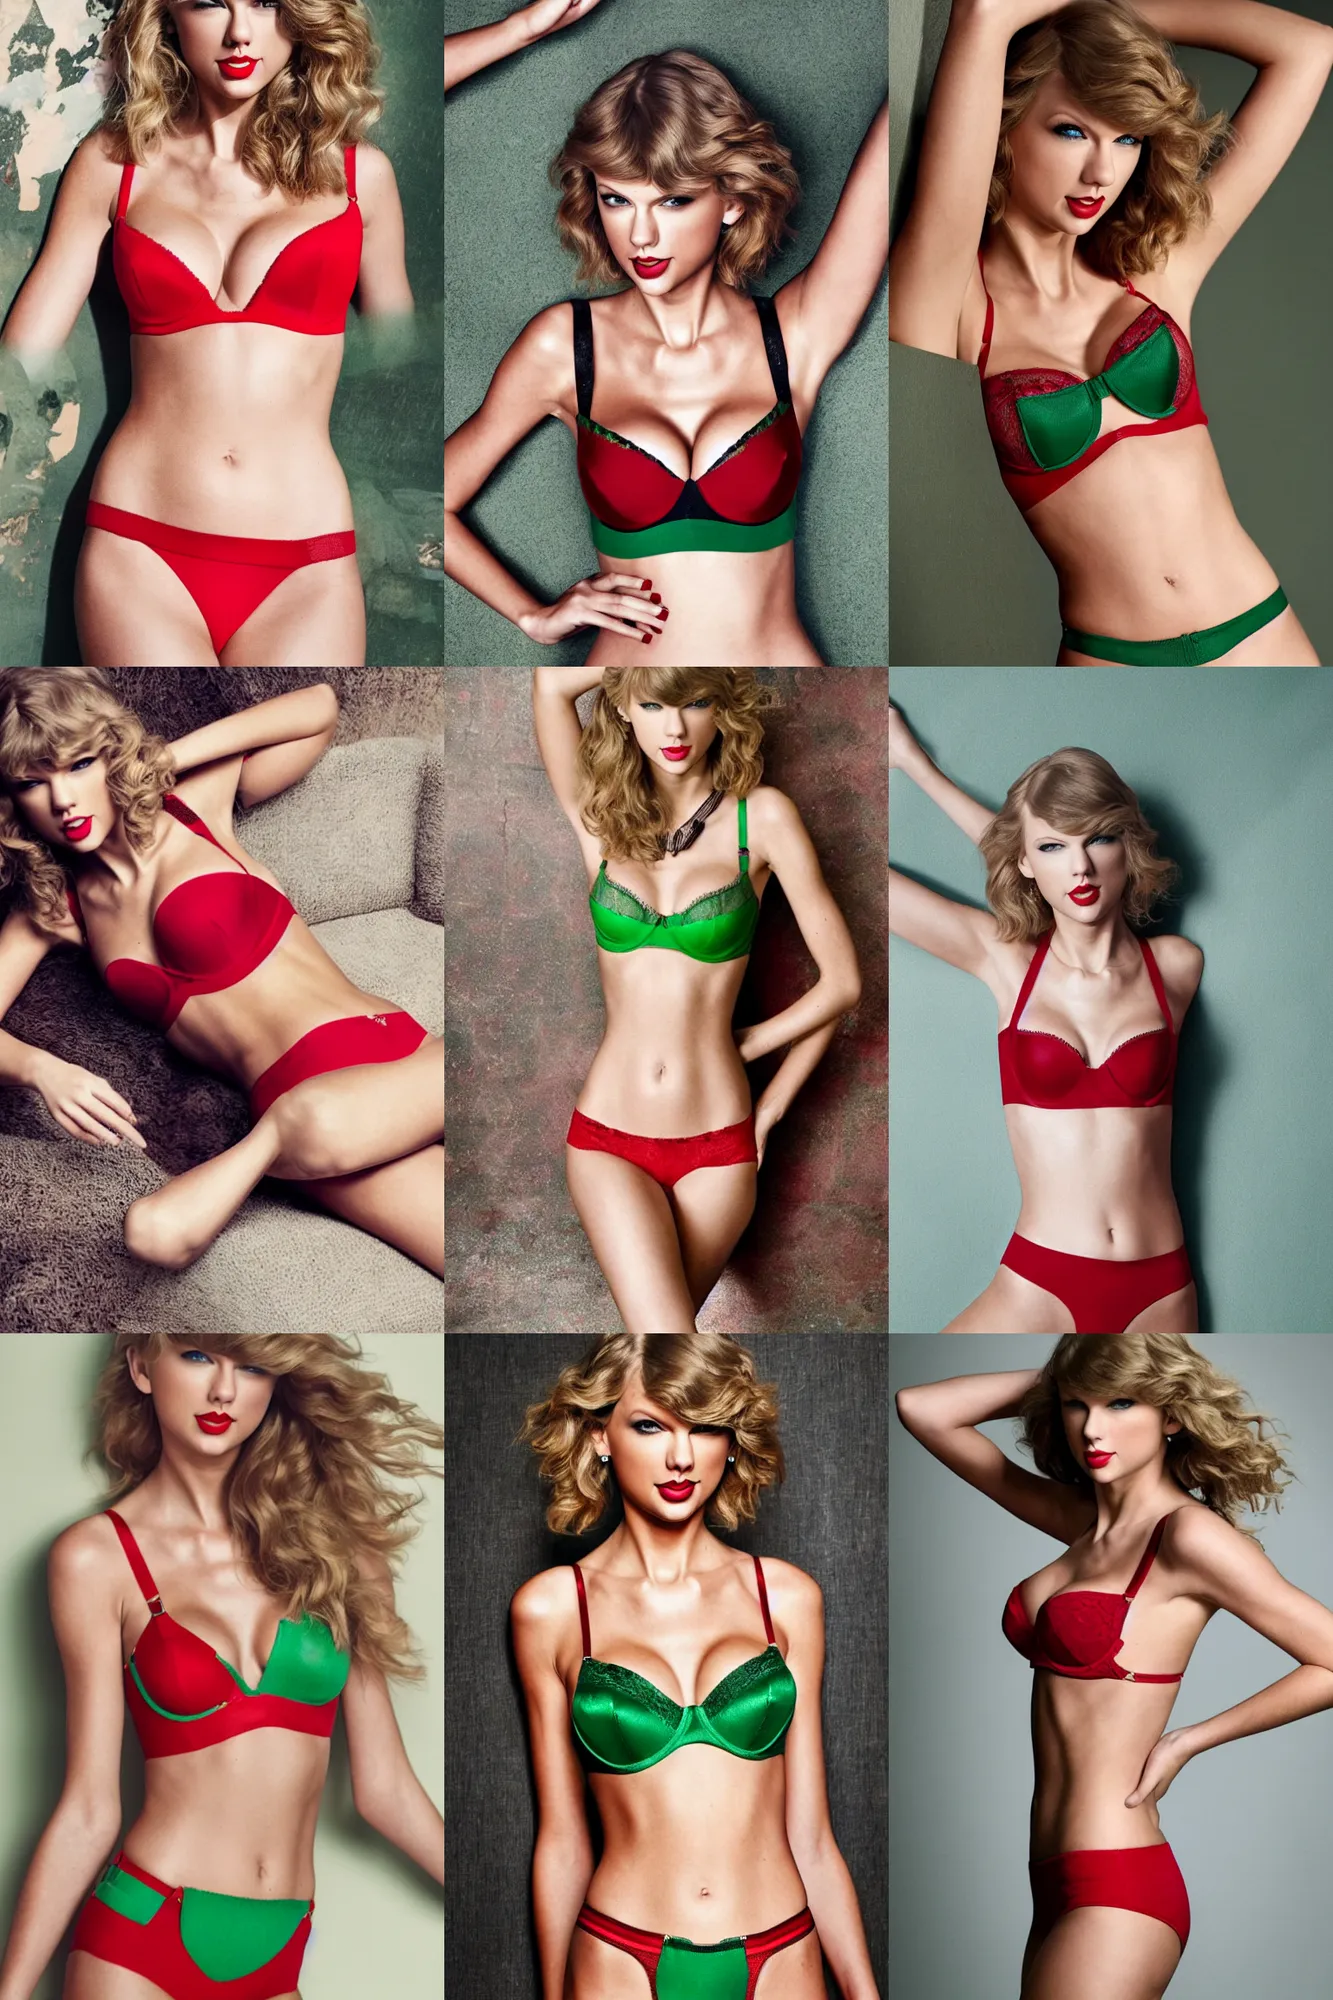 Prompt: taylor swift modeling red bra and green panties, professional photoshoot